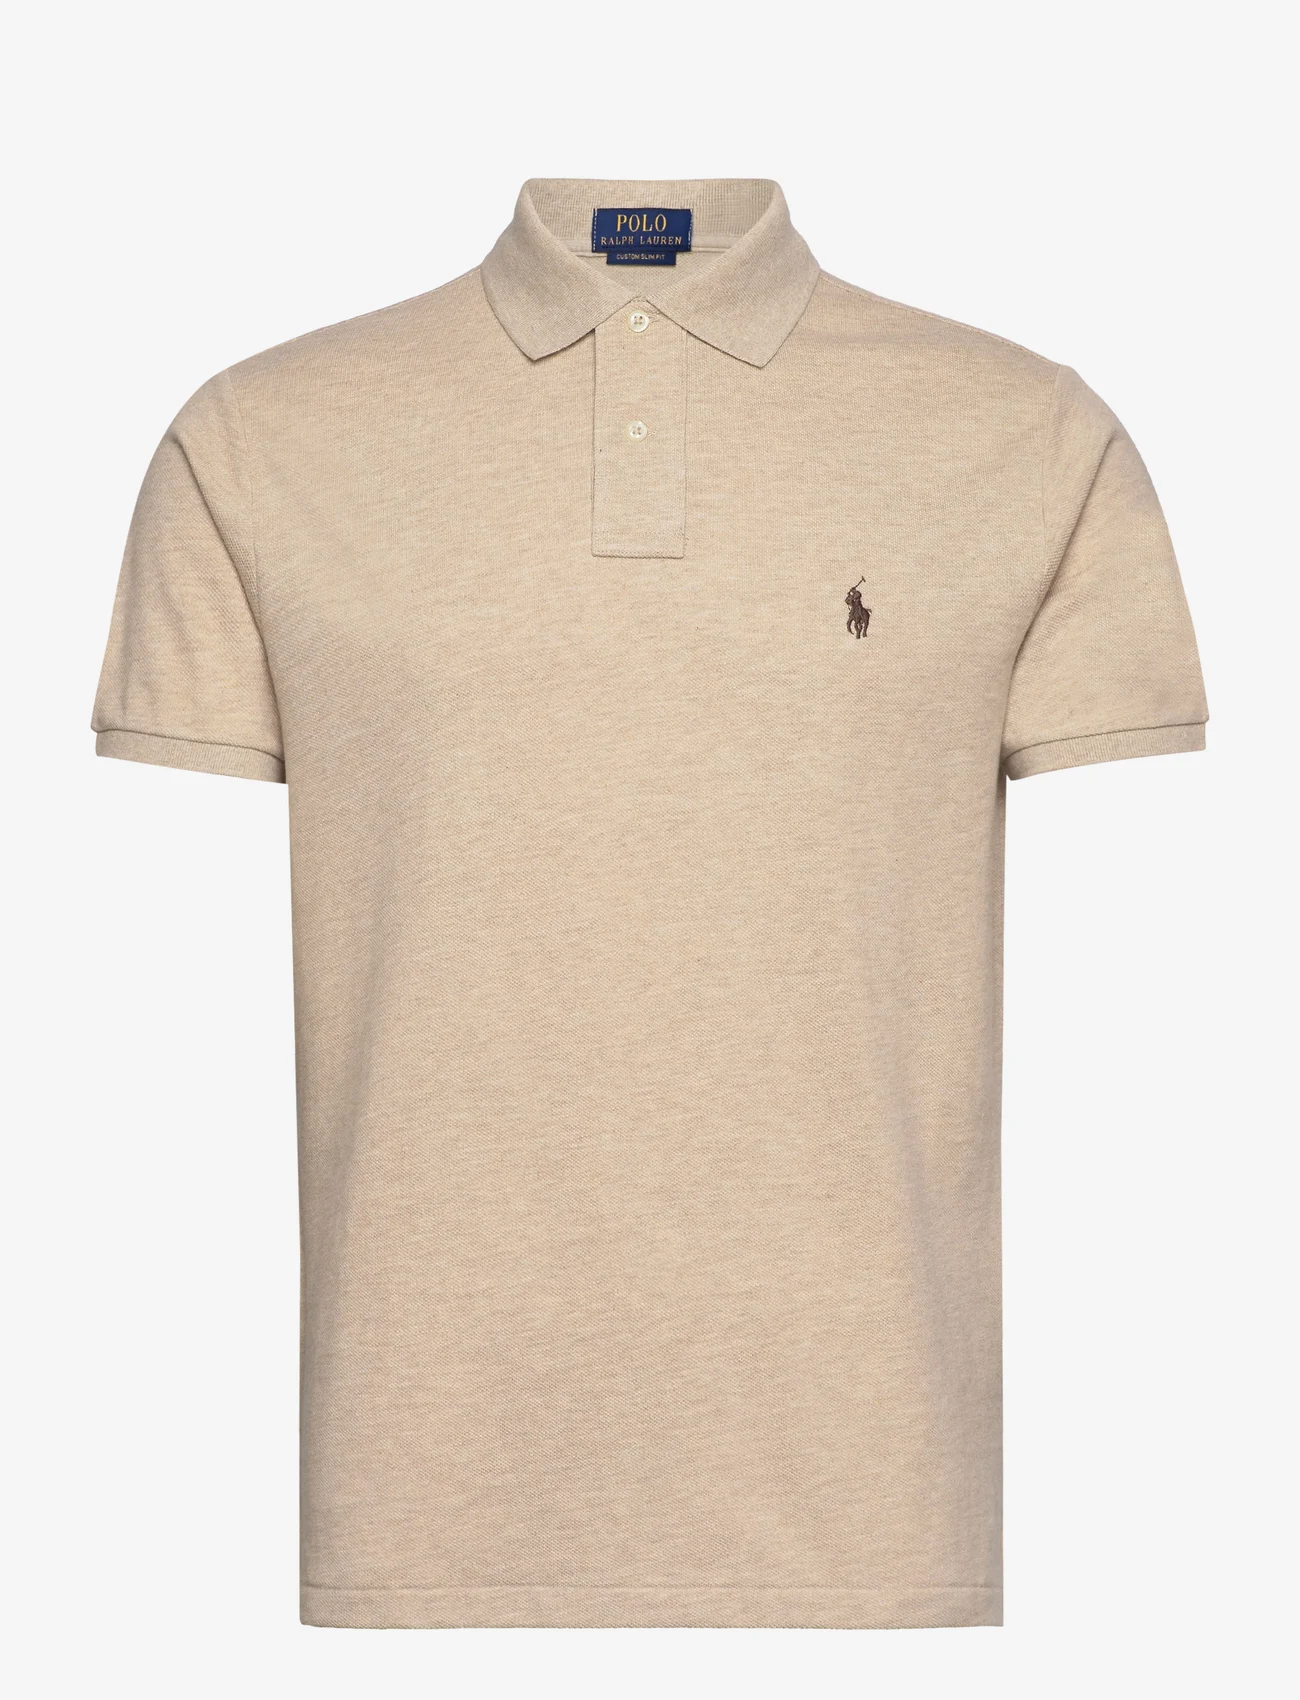 Polo Ralph Lauren - The Iconic Mesh Polo Shirt - gestrickte polohemden - expedition dune h - 1